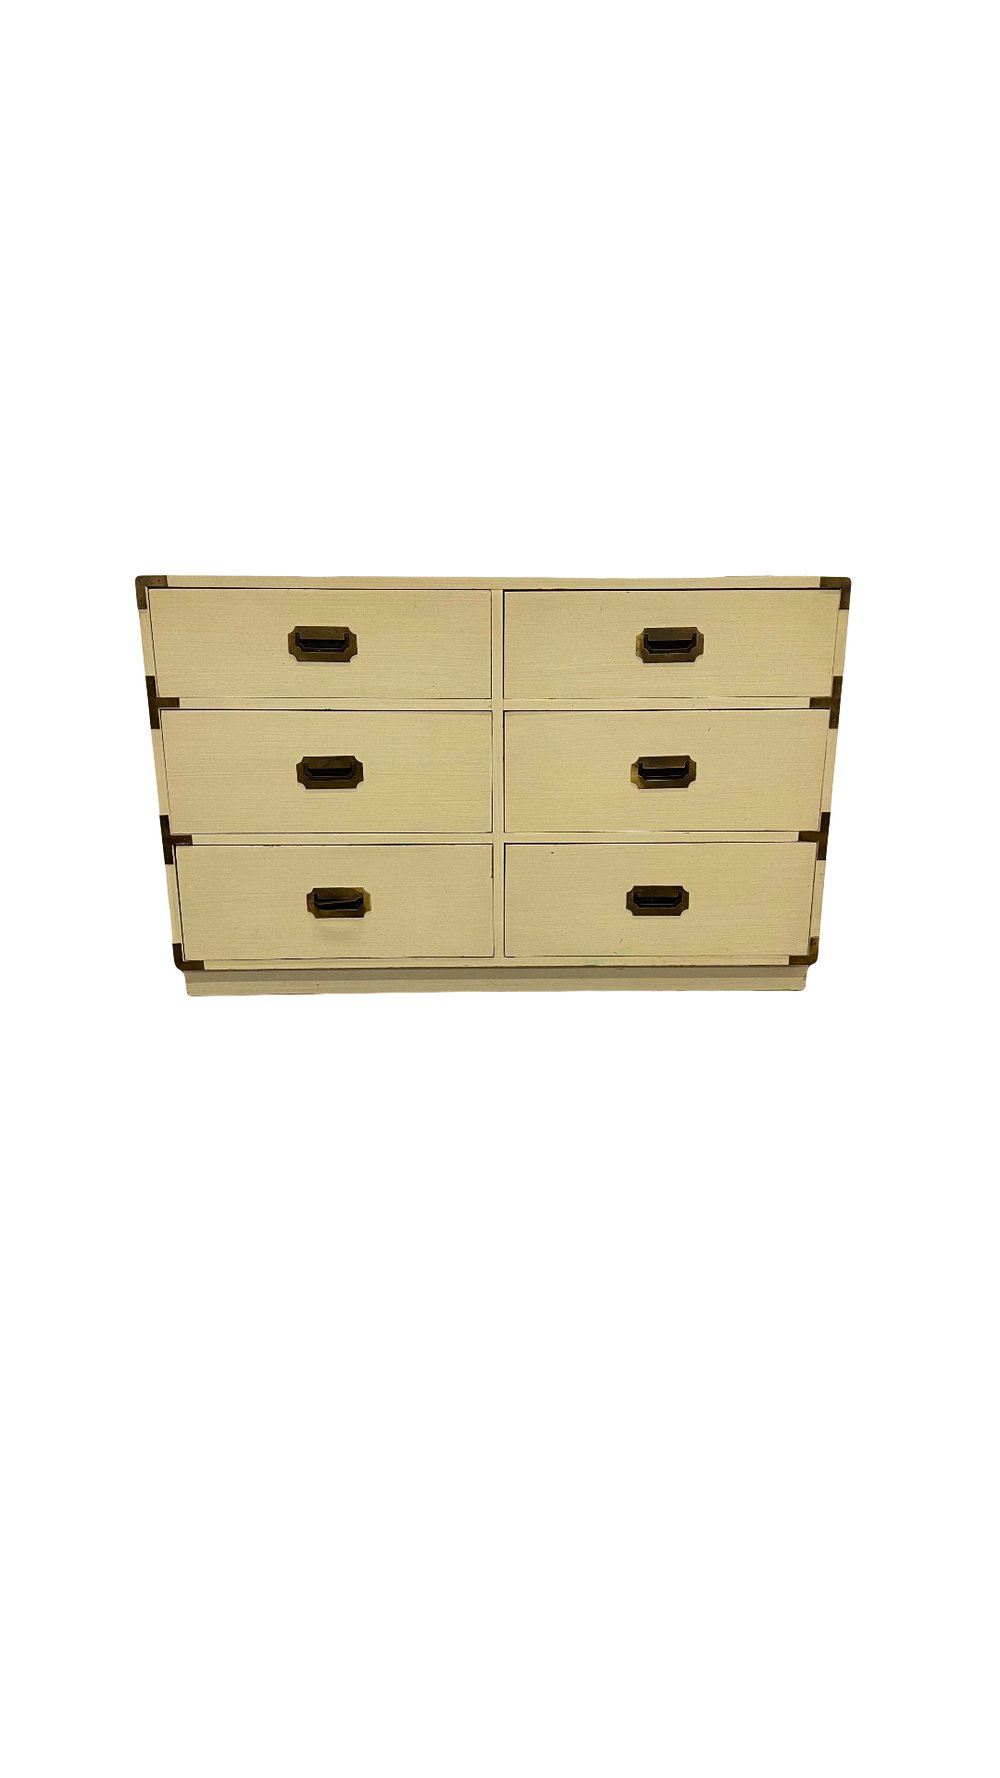 CUSTOMIZABLE: Dixie Campaigner Dresser with Shelving Unit